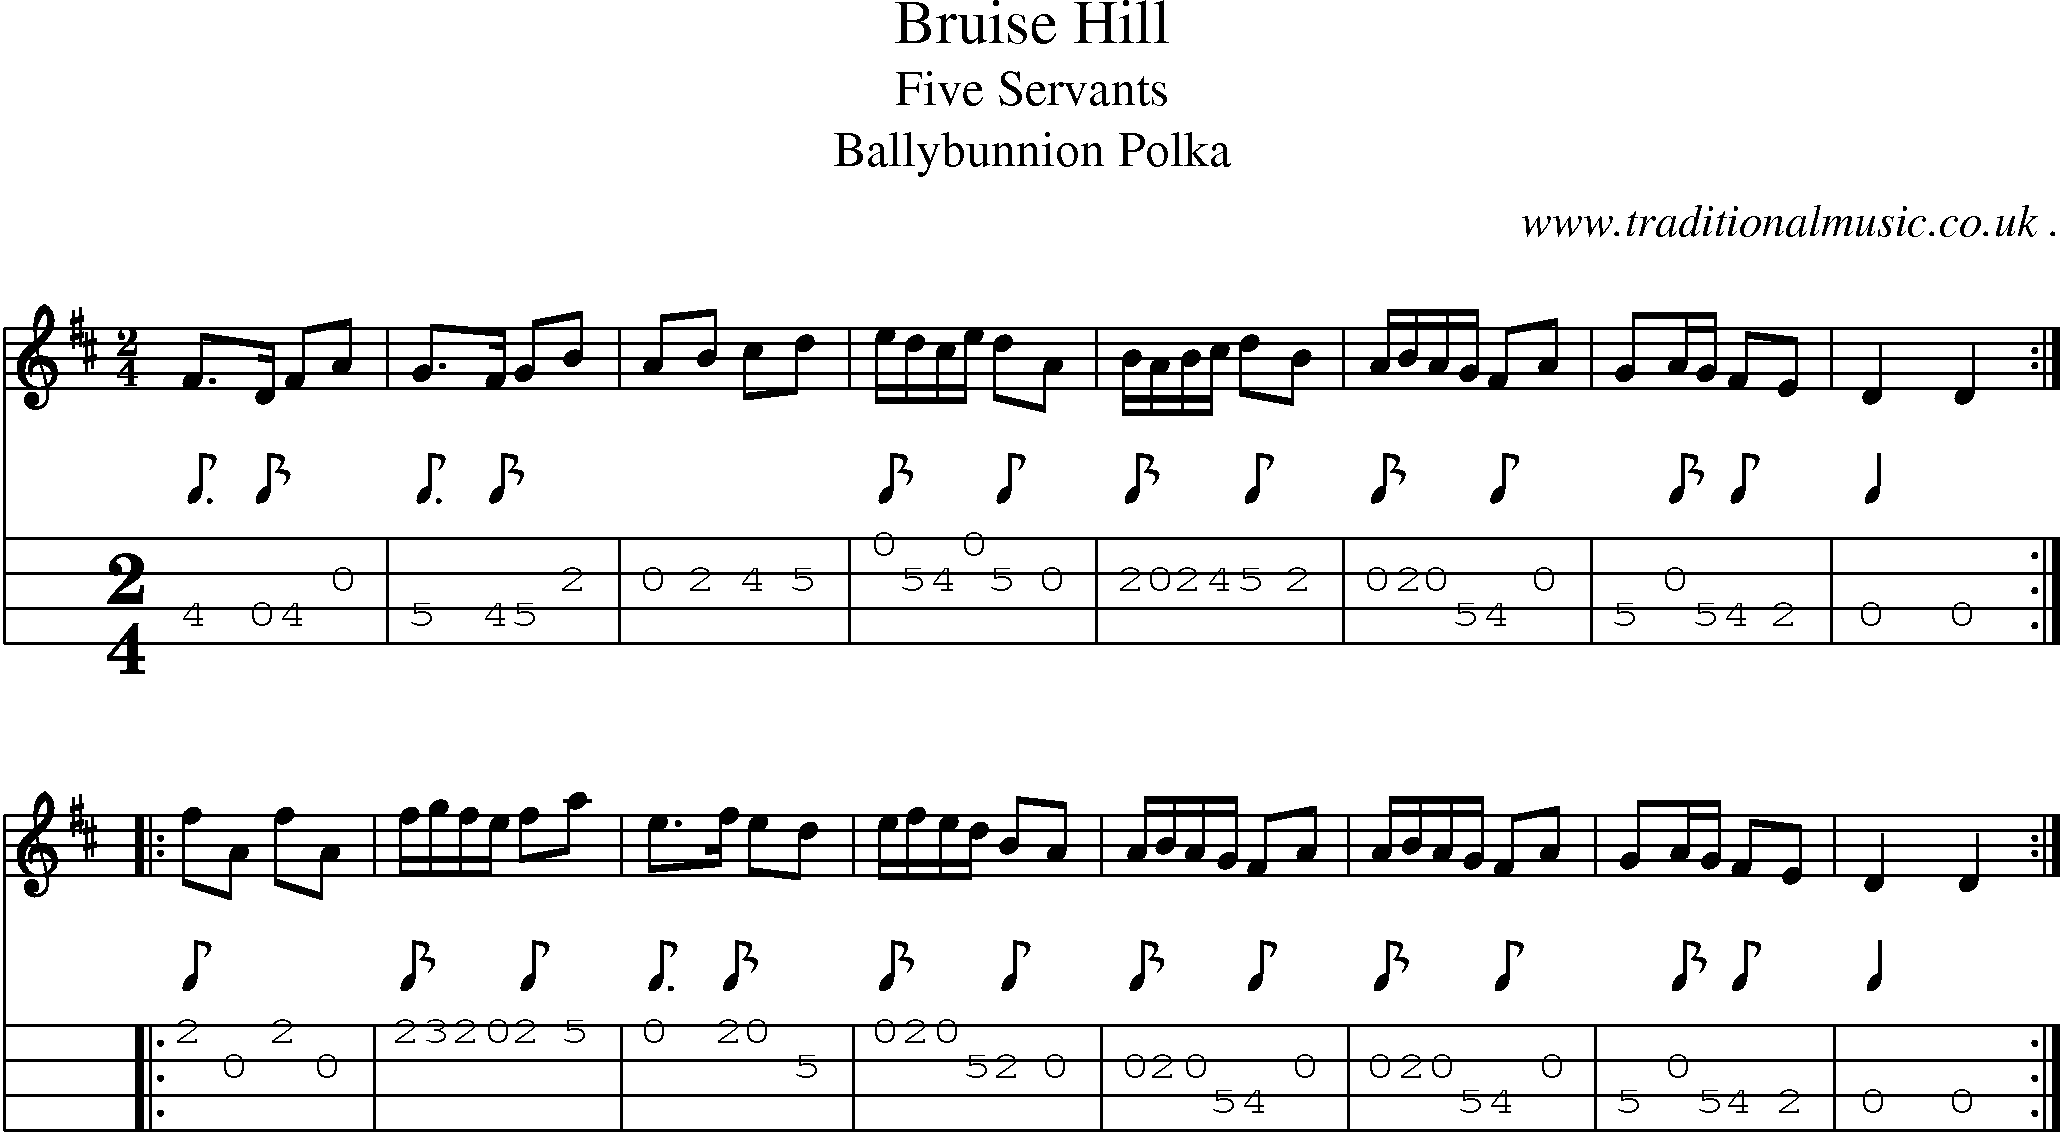 Sheet-Music and Mandolin Tabs for Bruise Hill